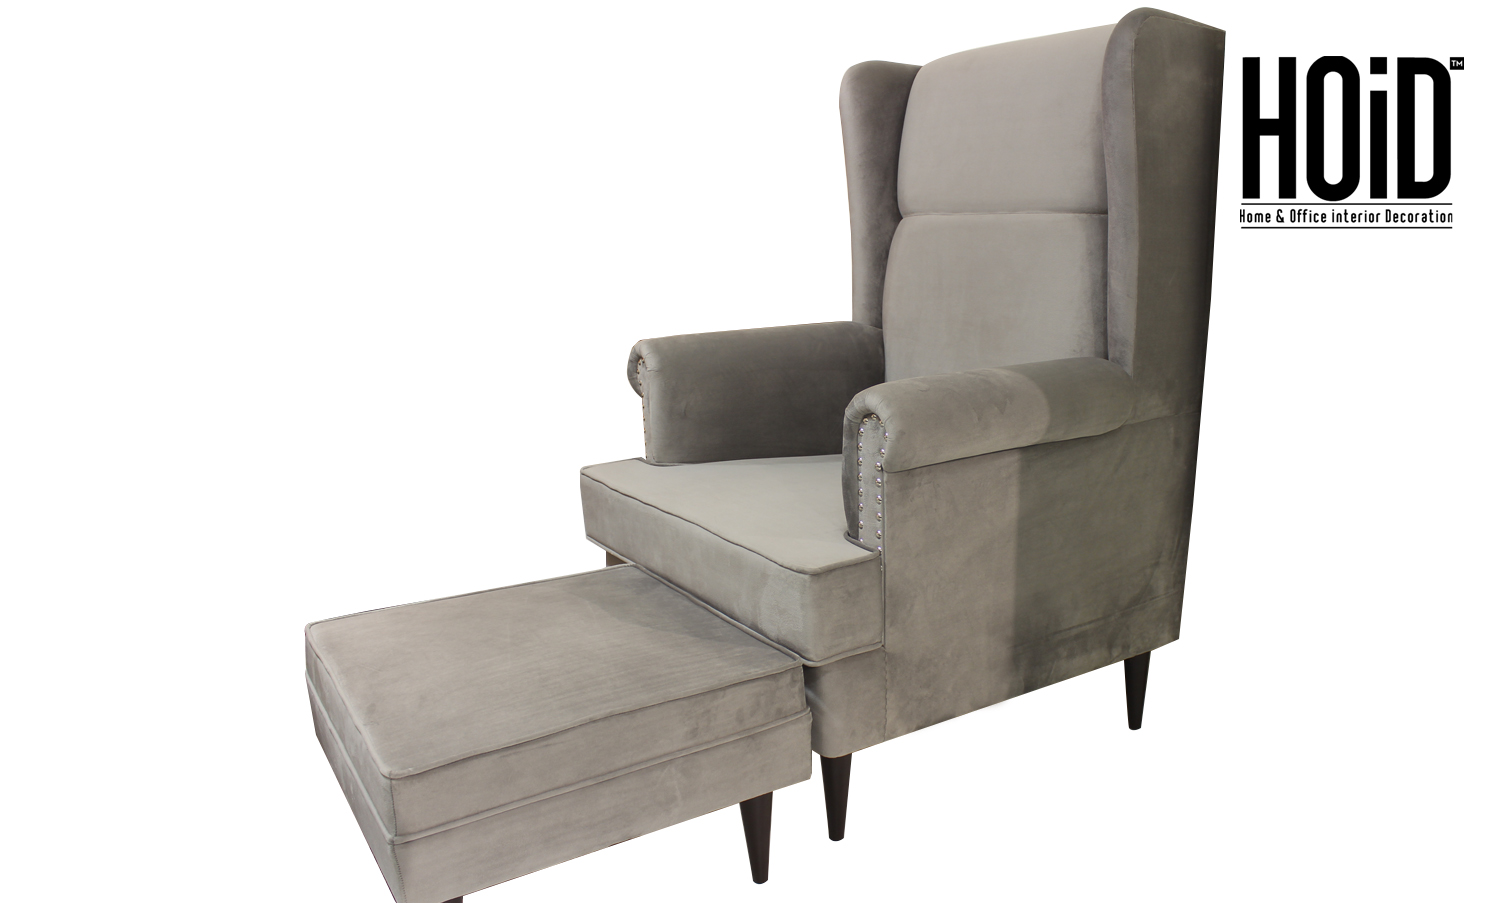 norme-seat-and-footrest-in-grey-1.jpg